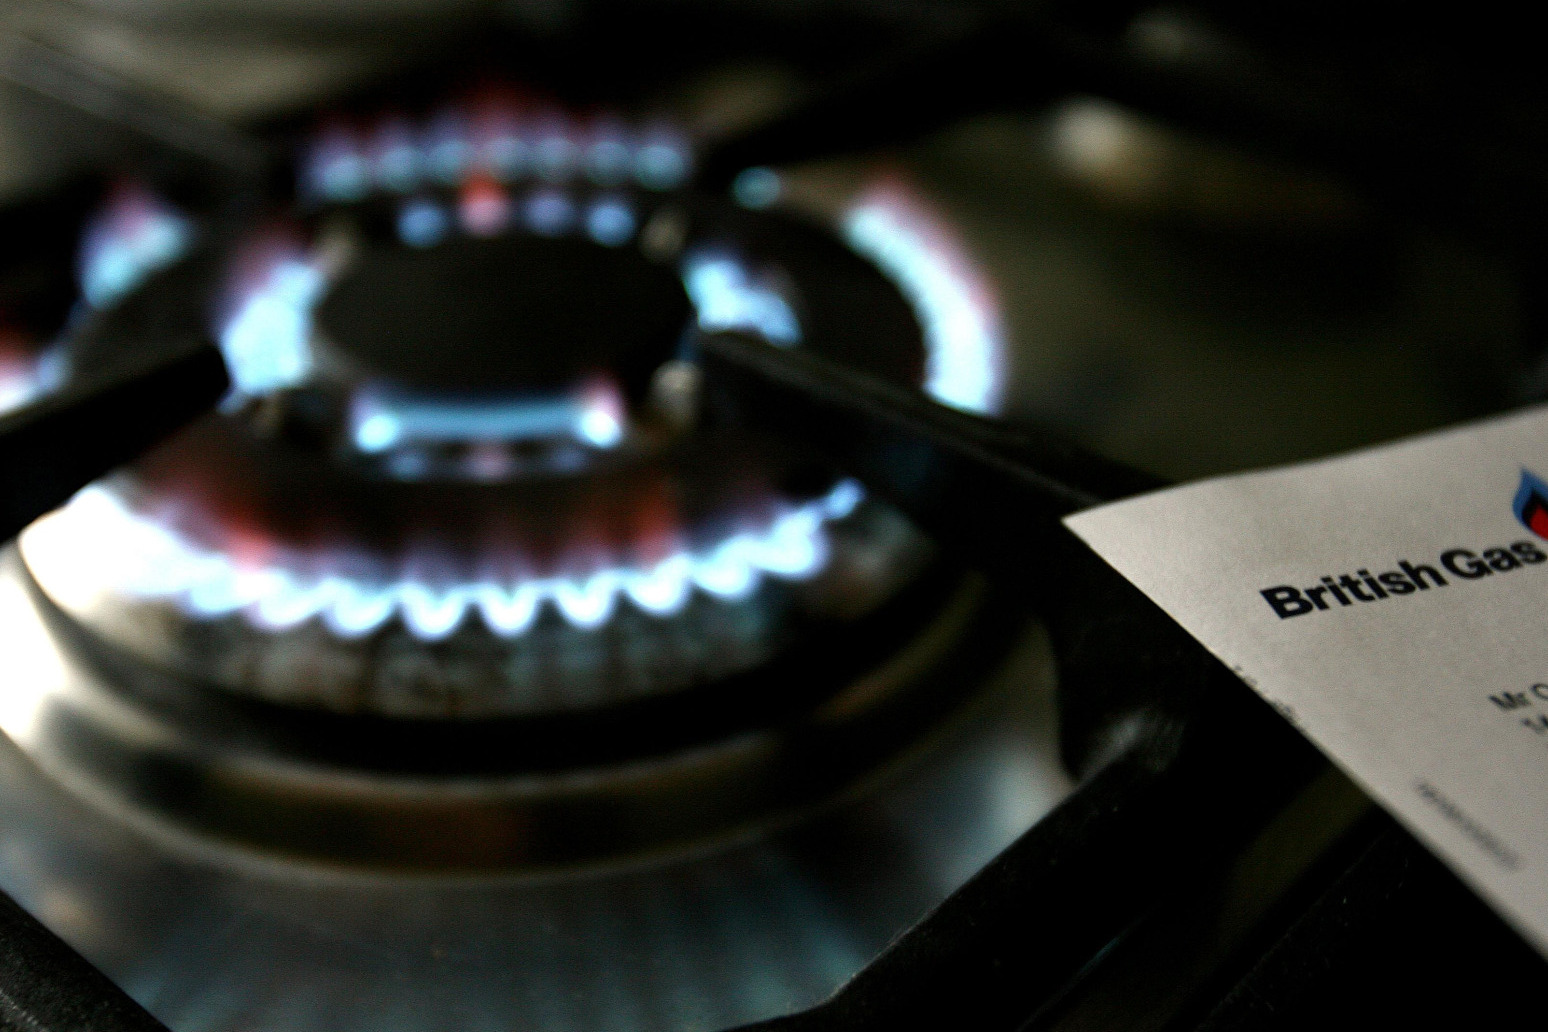 British Gas pledges to donate 10% of profit as energy price cap expected to rise 